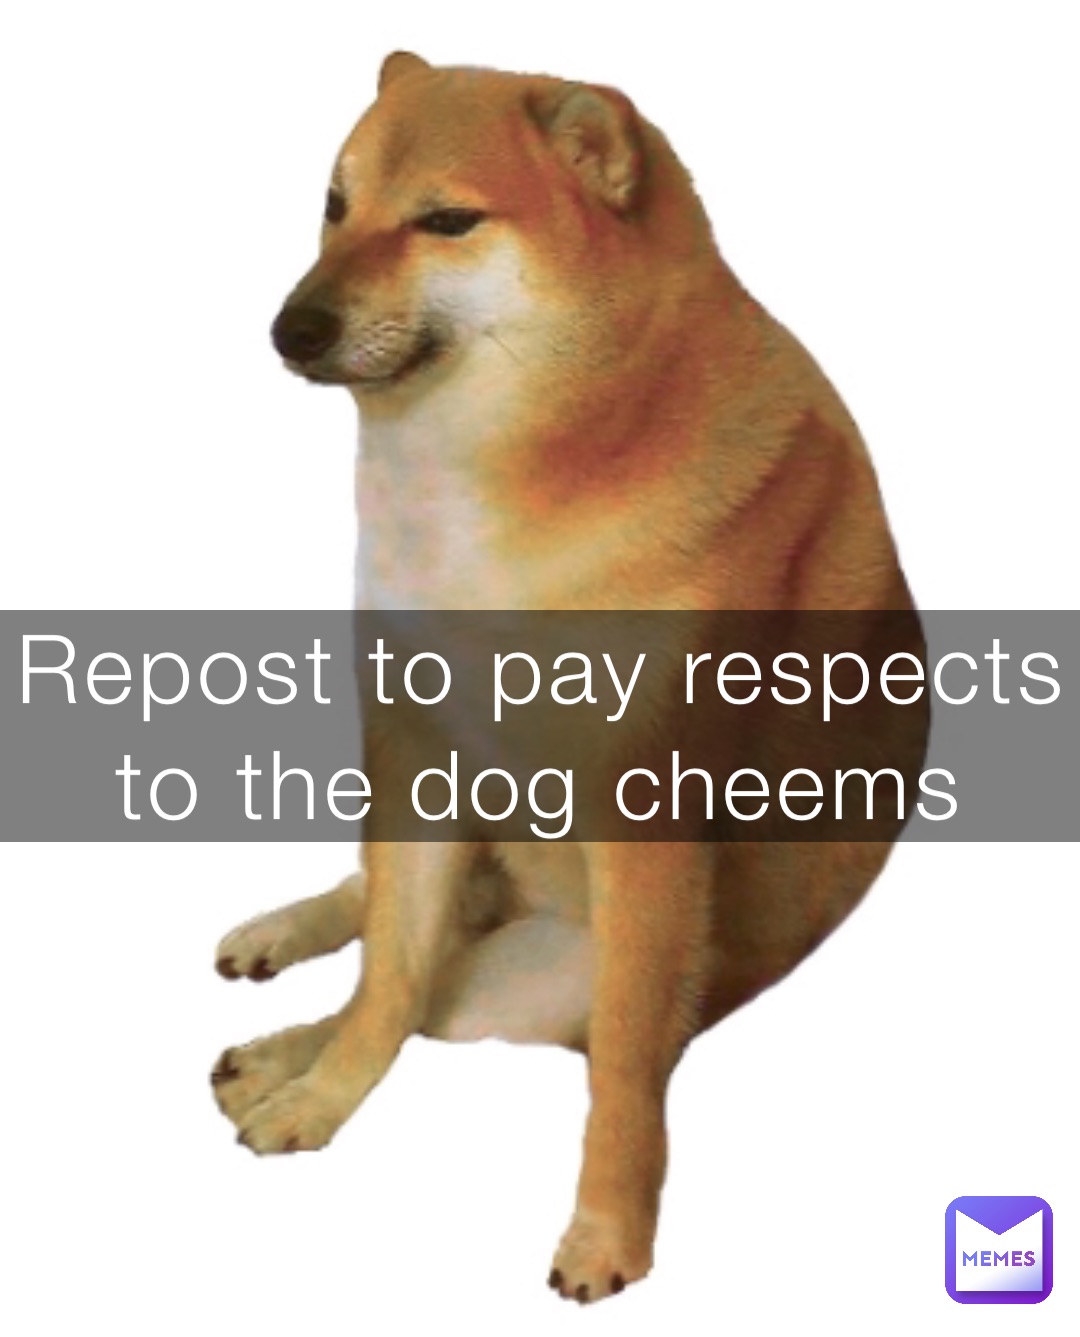 Repost to pay respects to the dog cheems